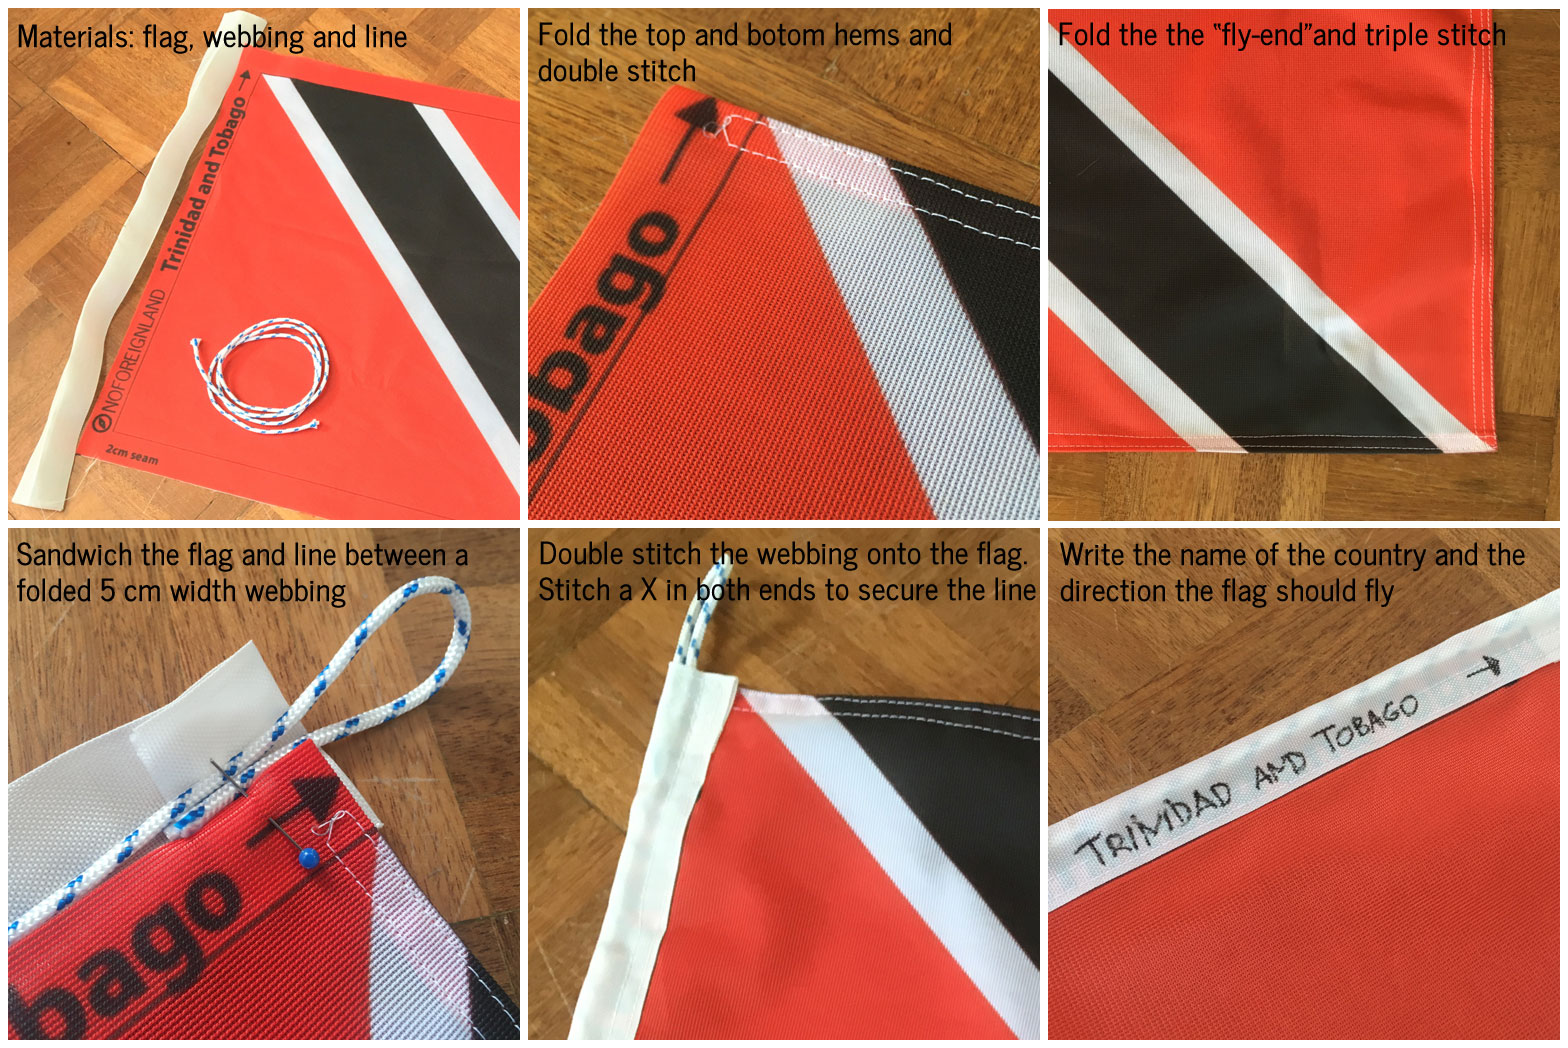 6 easy steps to assemble the flags